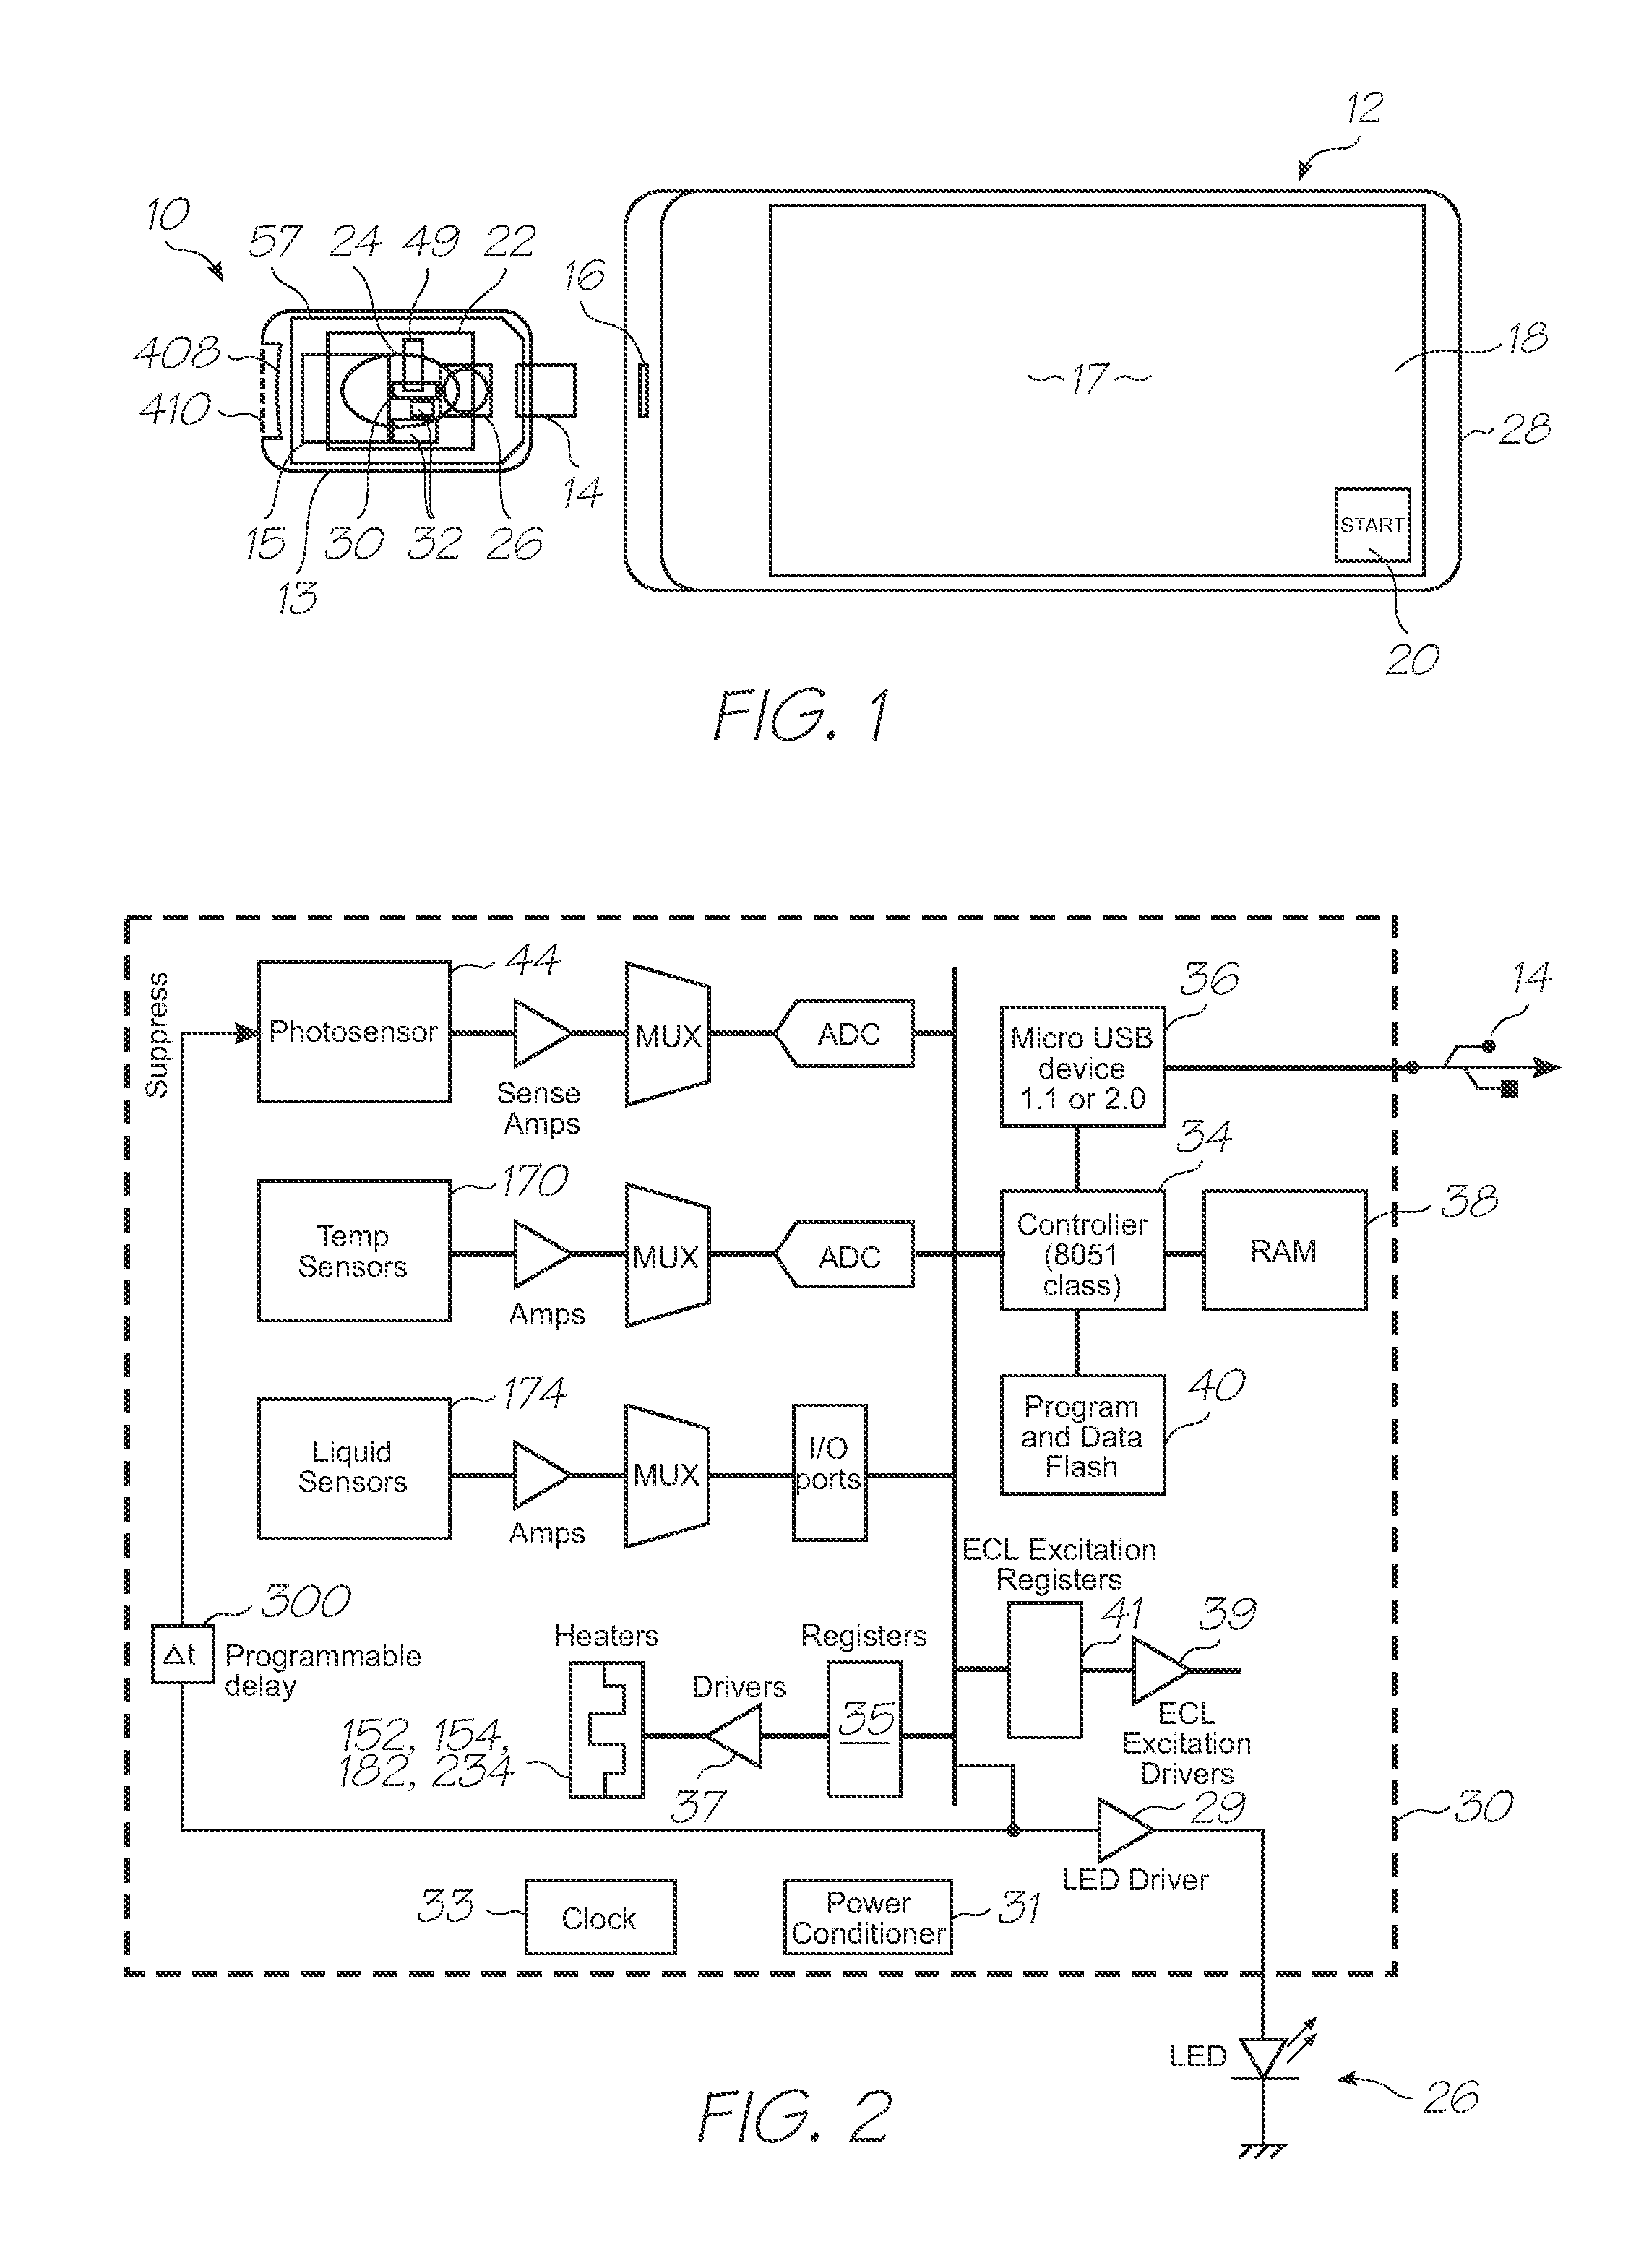 Loc device with parallel incubation and parallel DNA and RNA amplification functionality